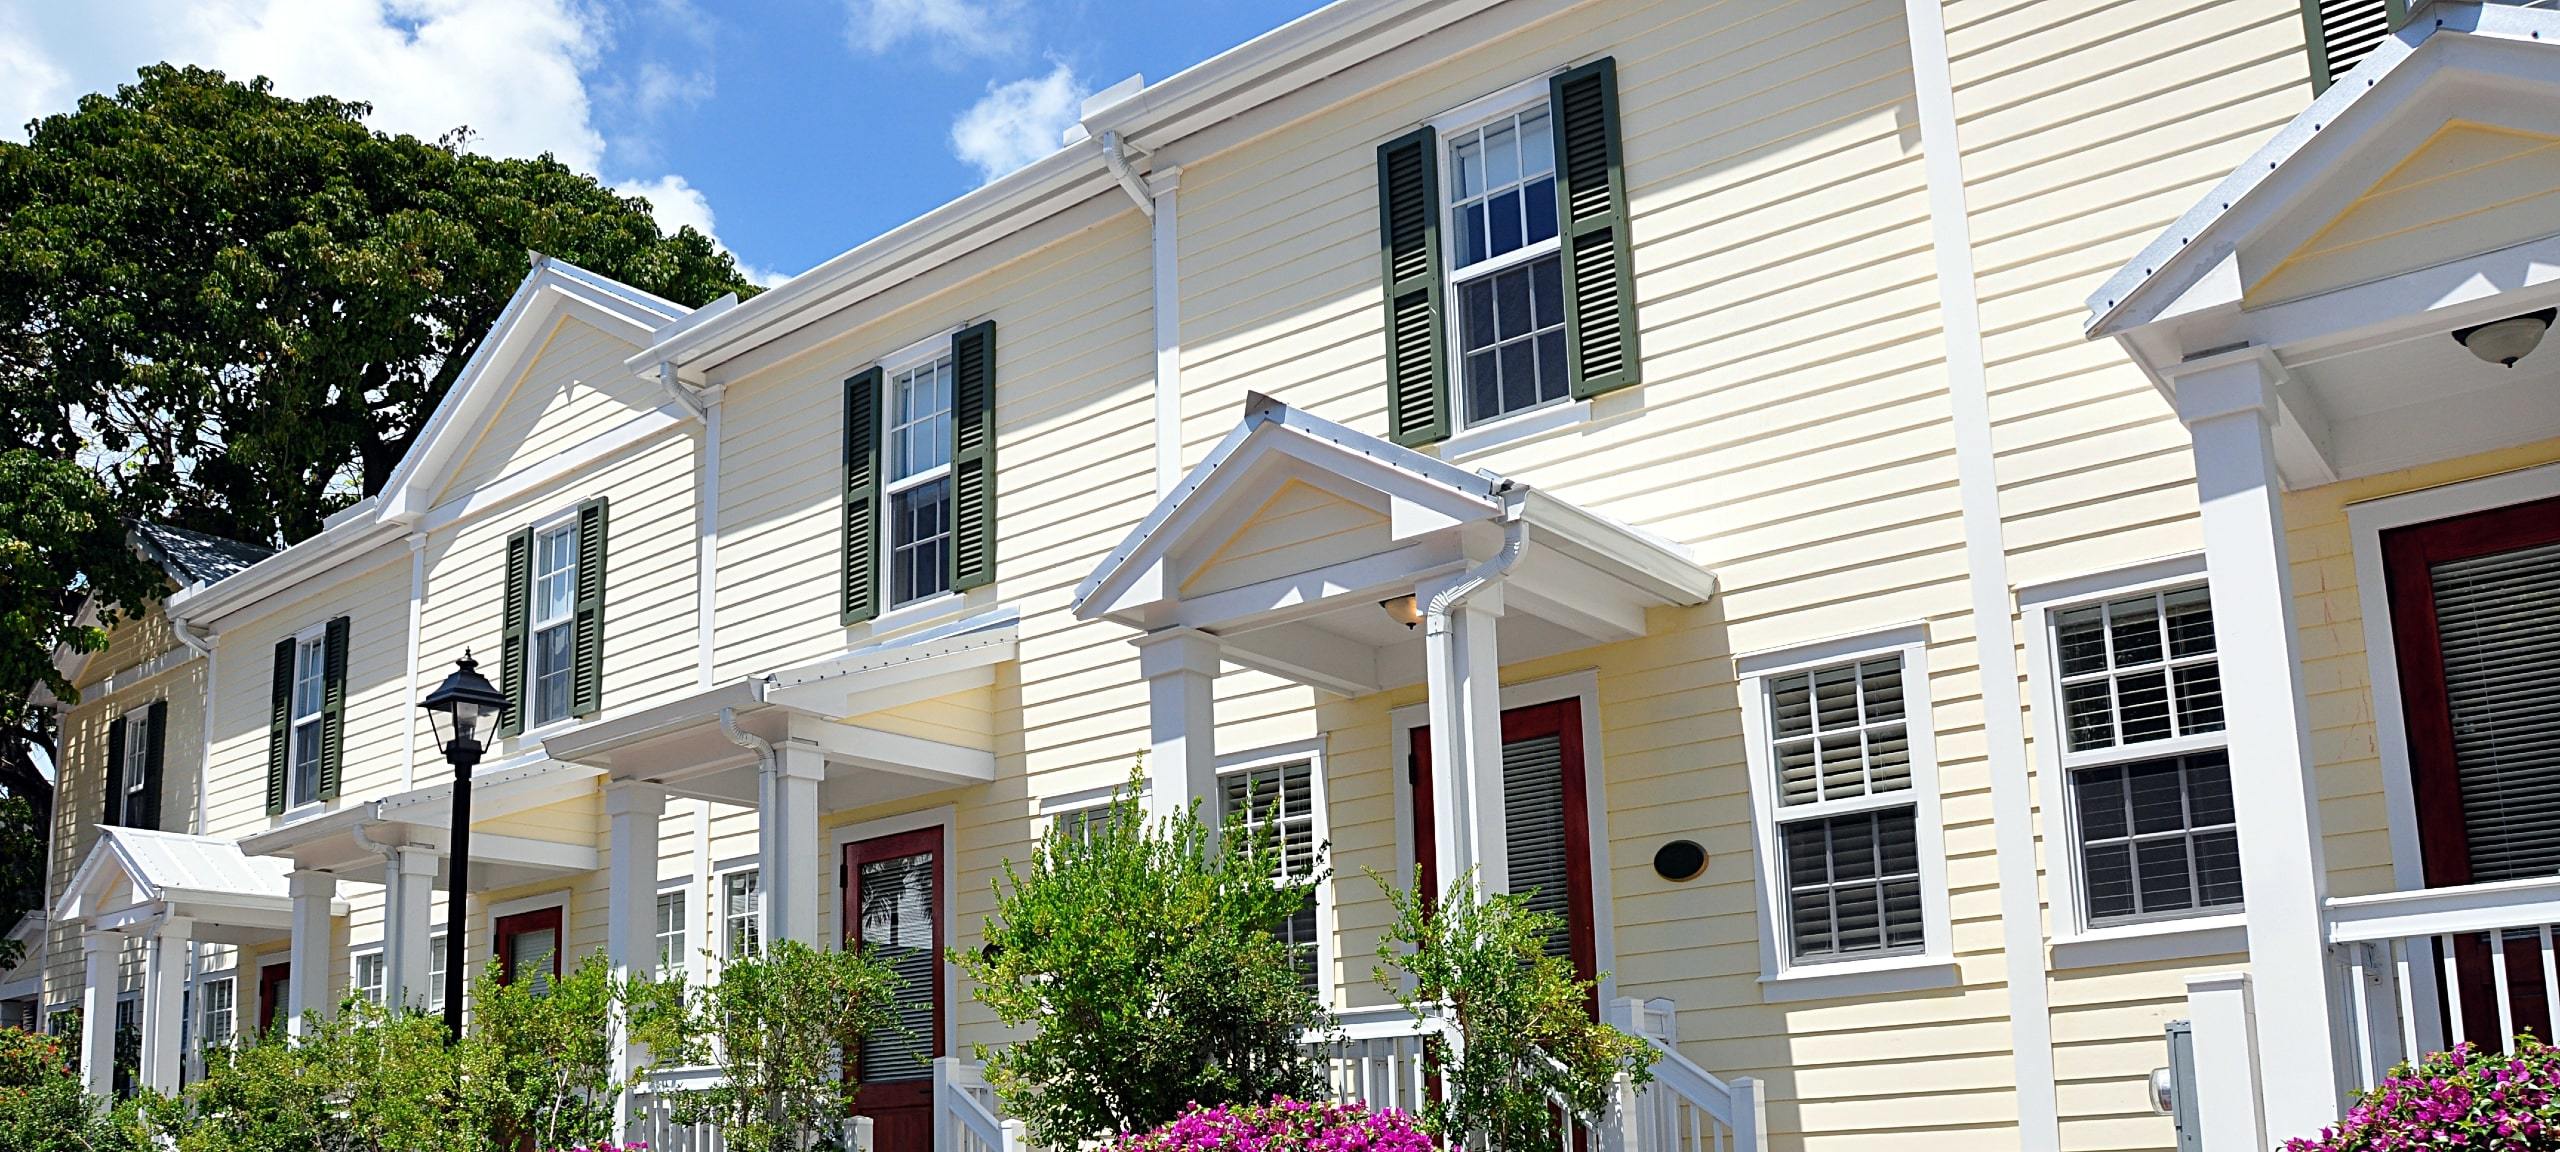 Row of traditional style townhomes, typical of College Park, Orlando neighborhood